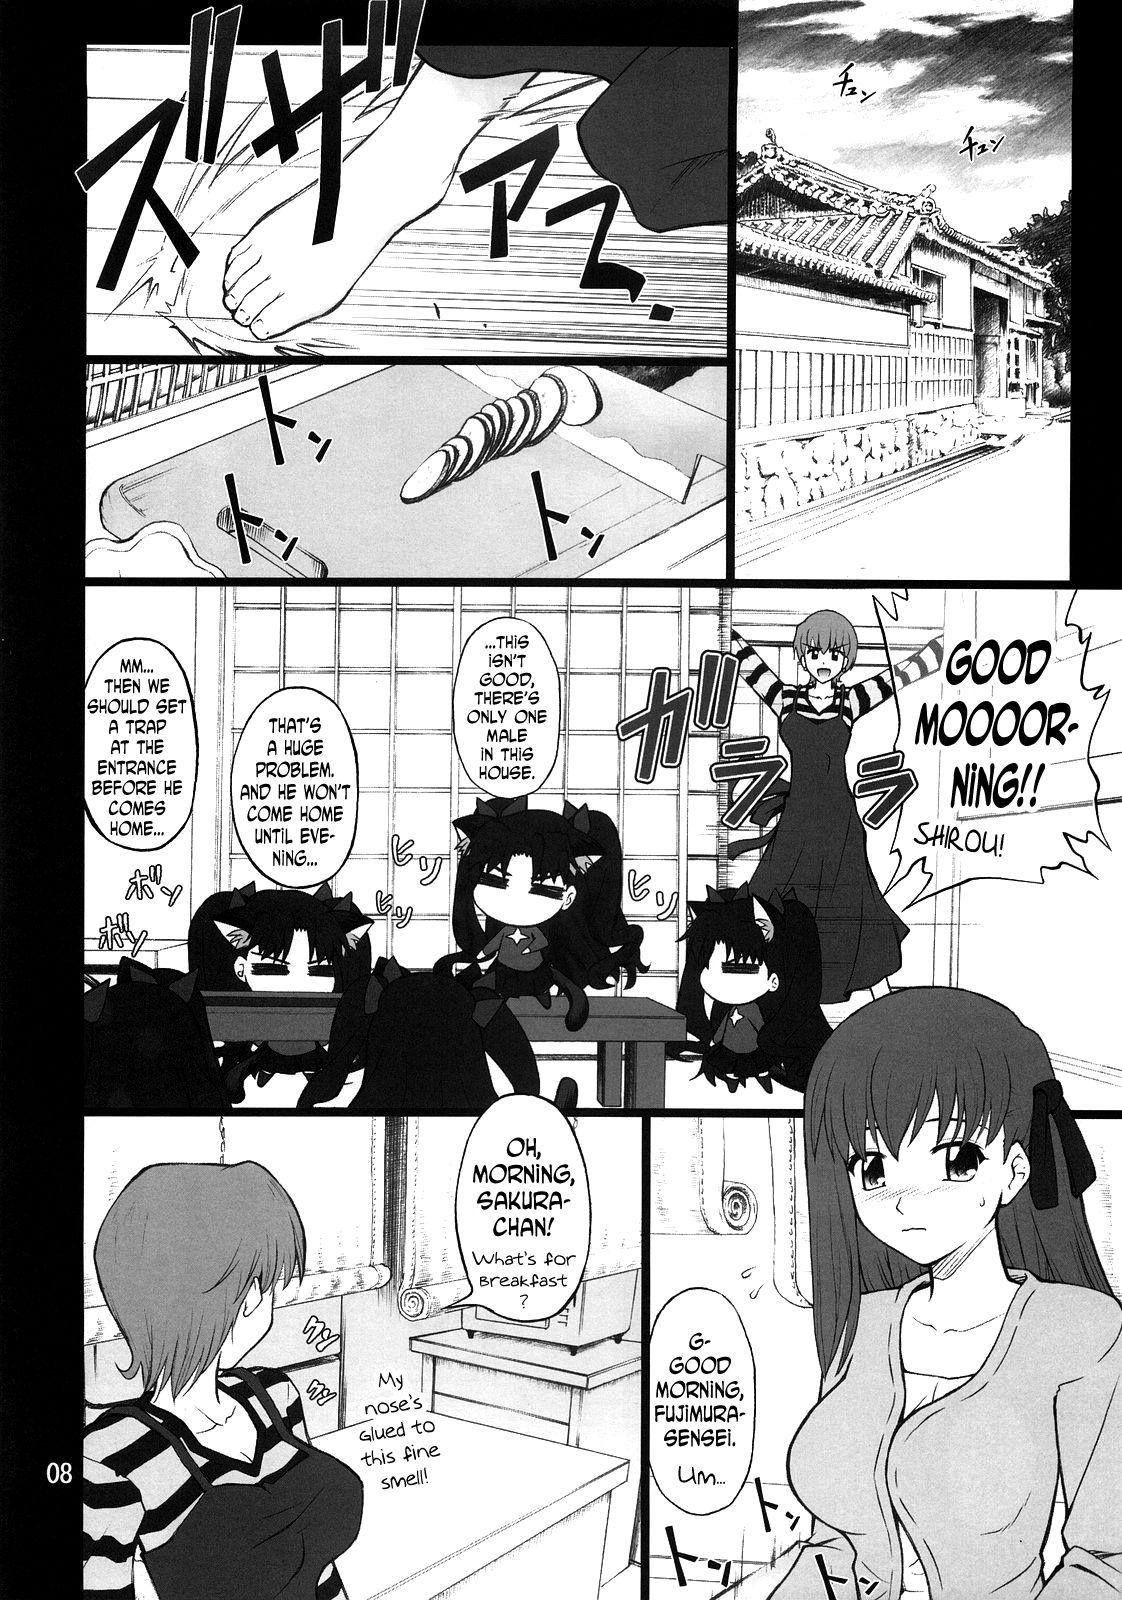 Facesitting Grem-Rin 2 - Fate stay night Pool - Page 7